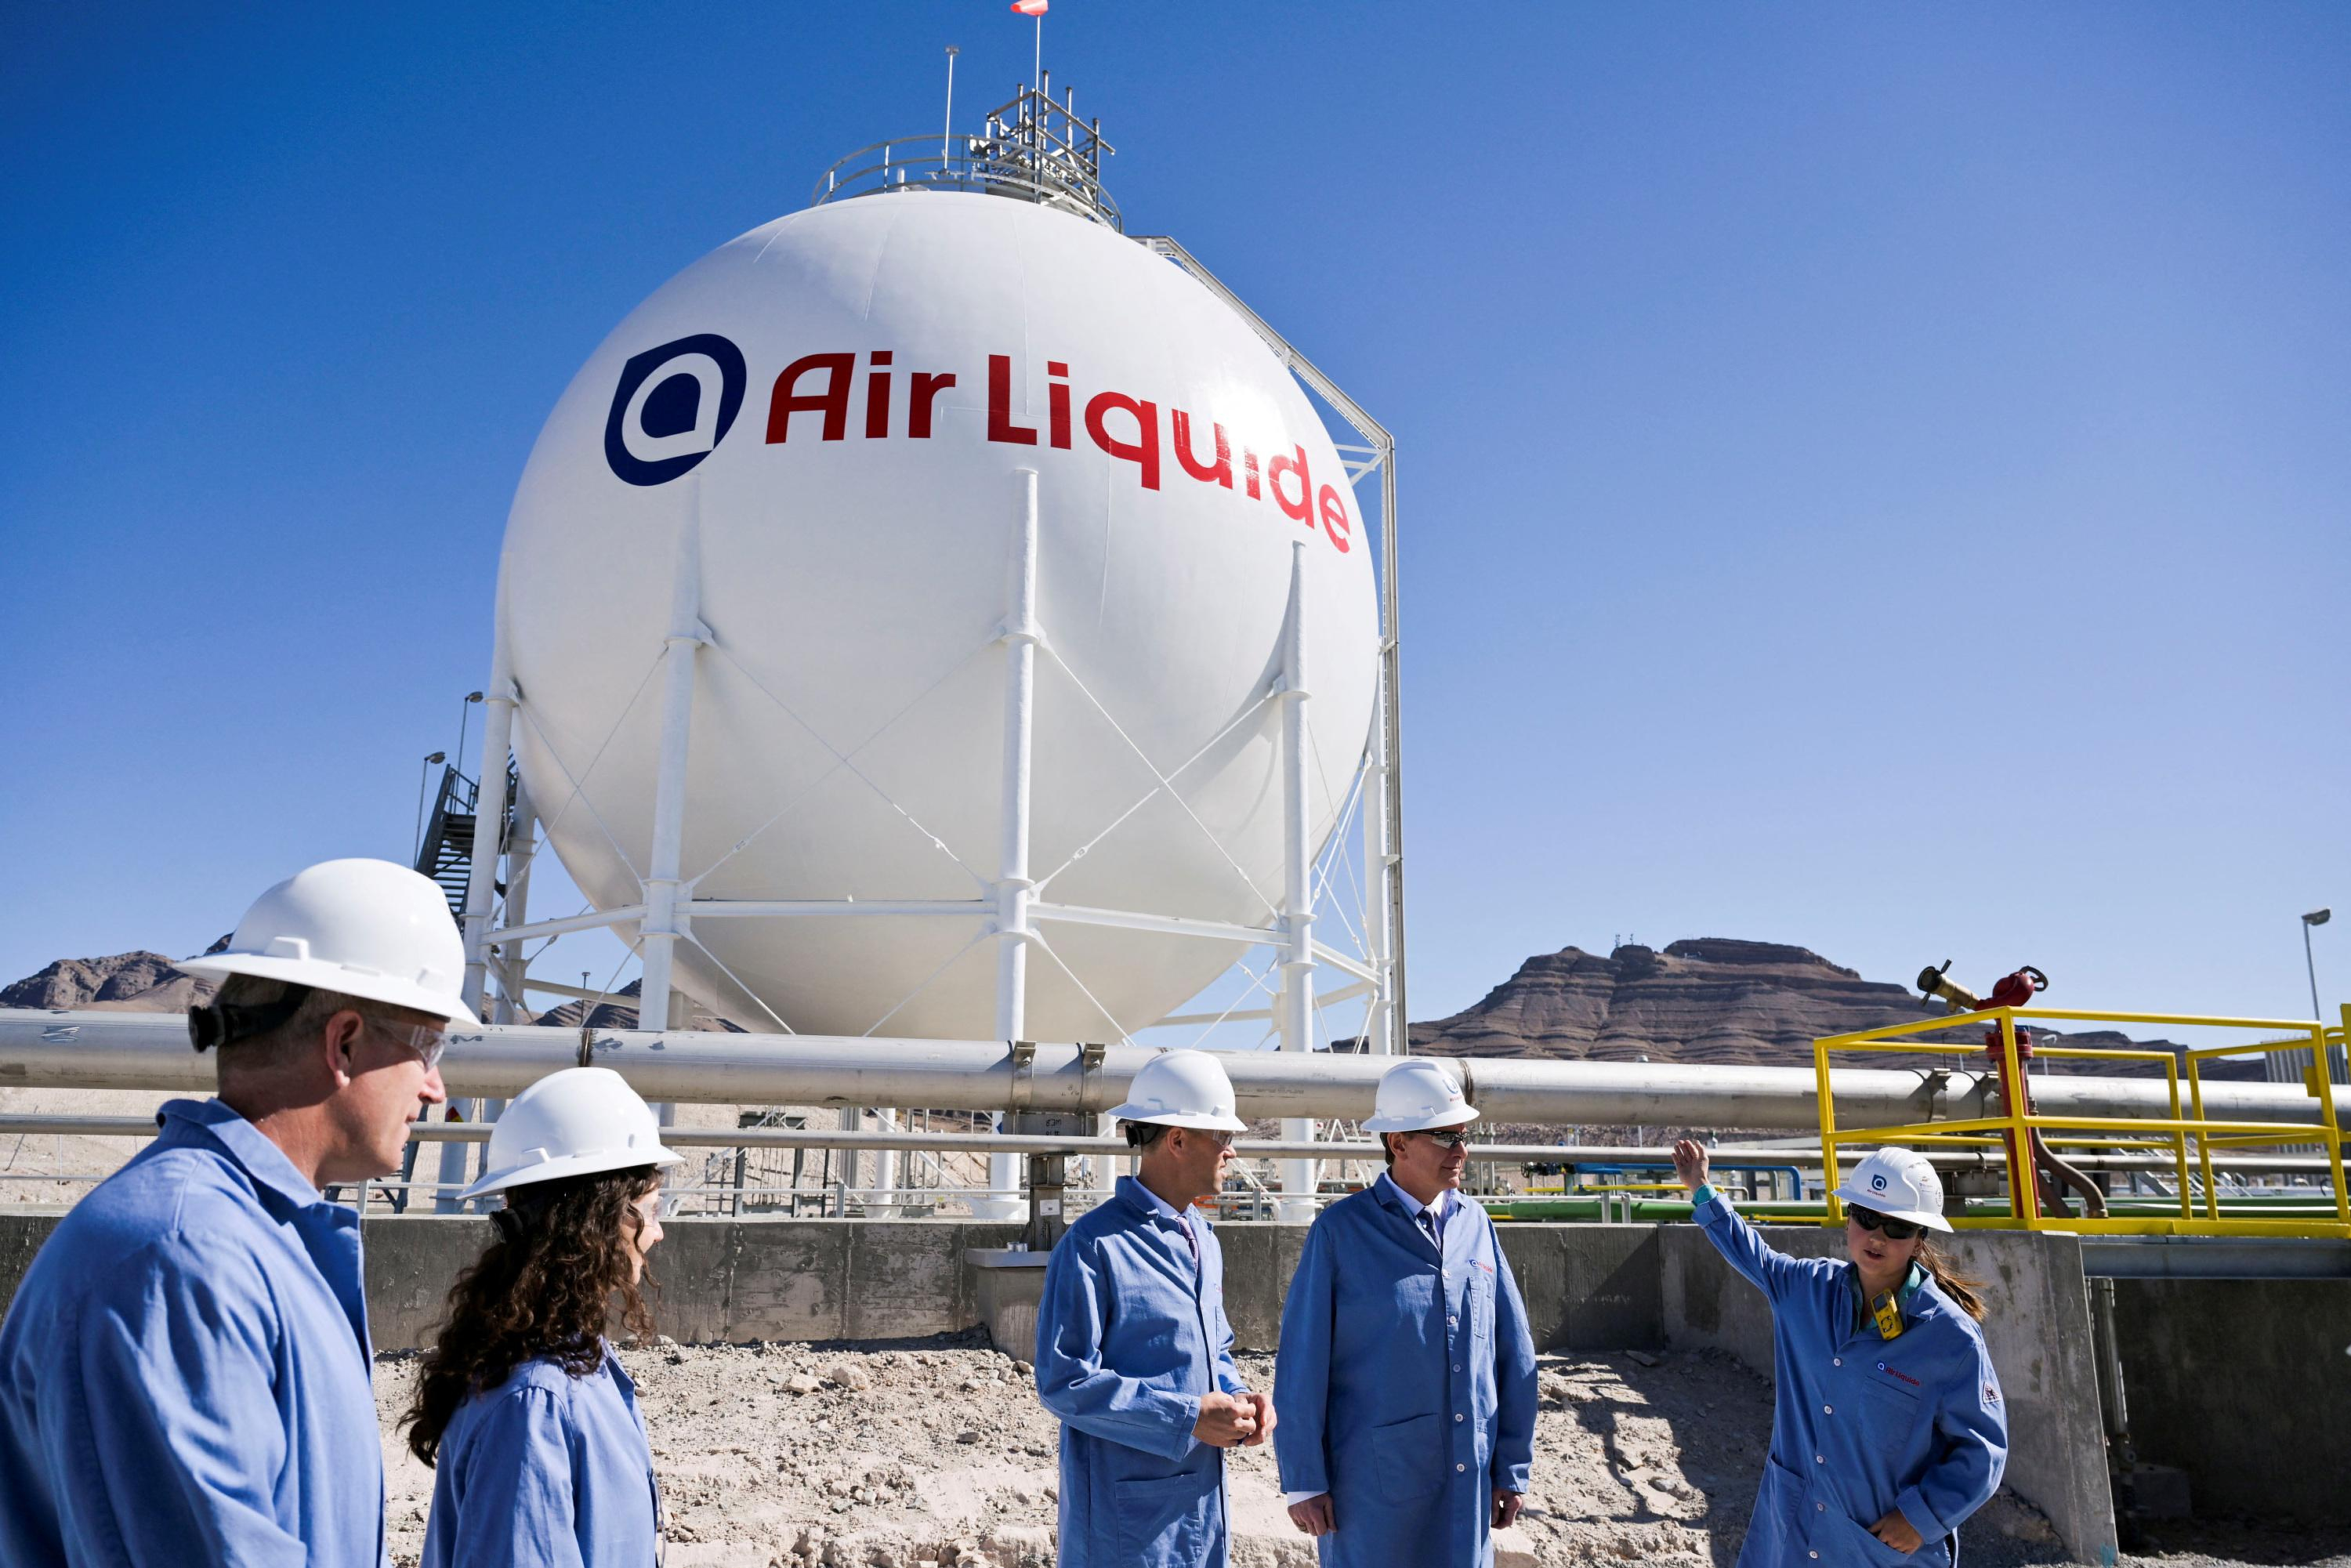 Air Liquide increases its net profit by 11.6% and doubles its operating margin target